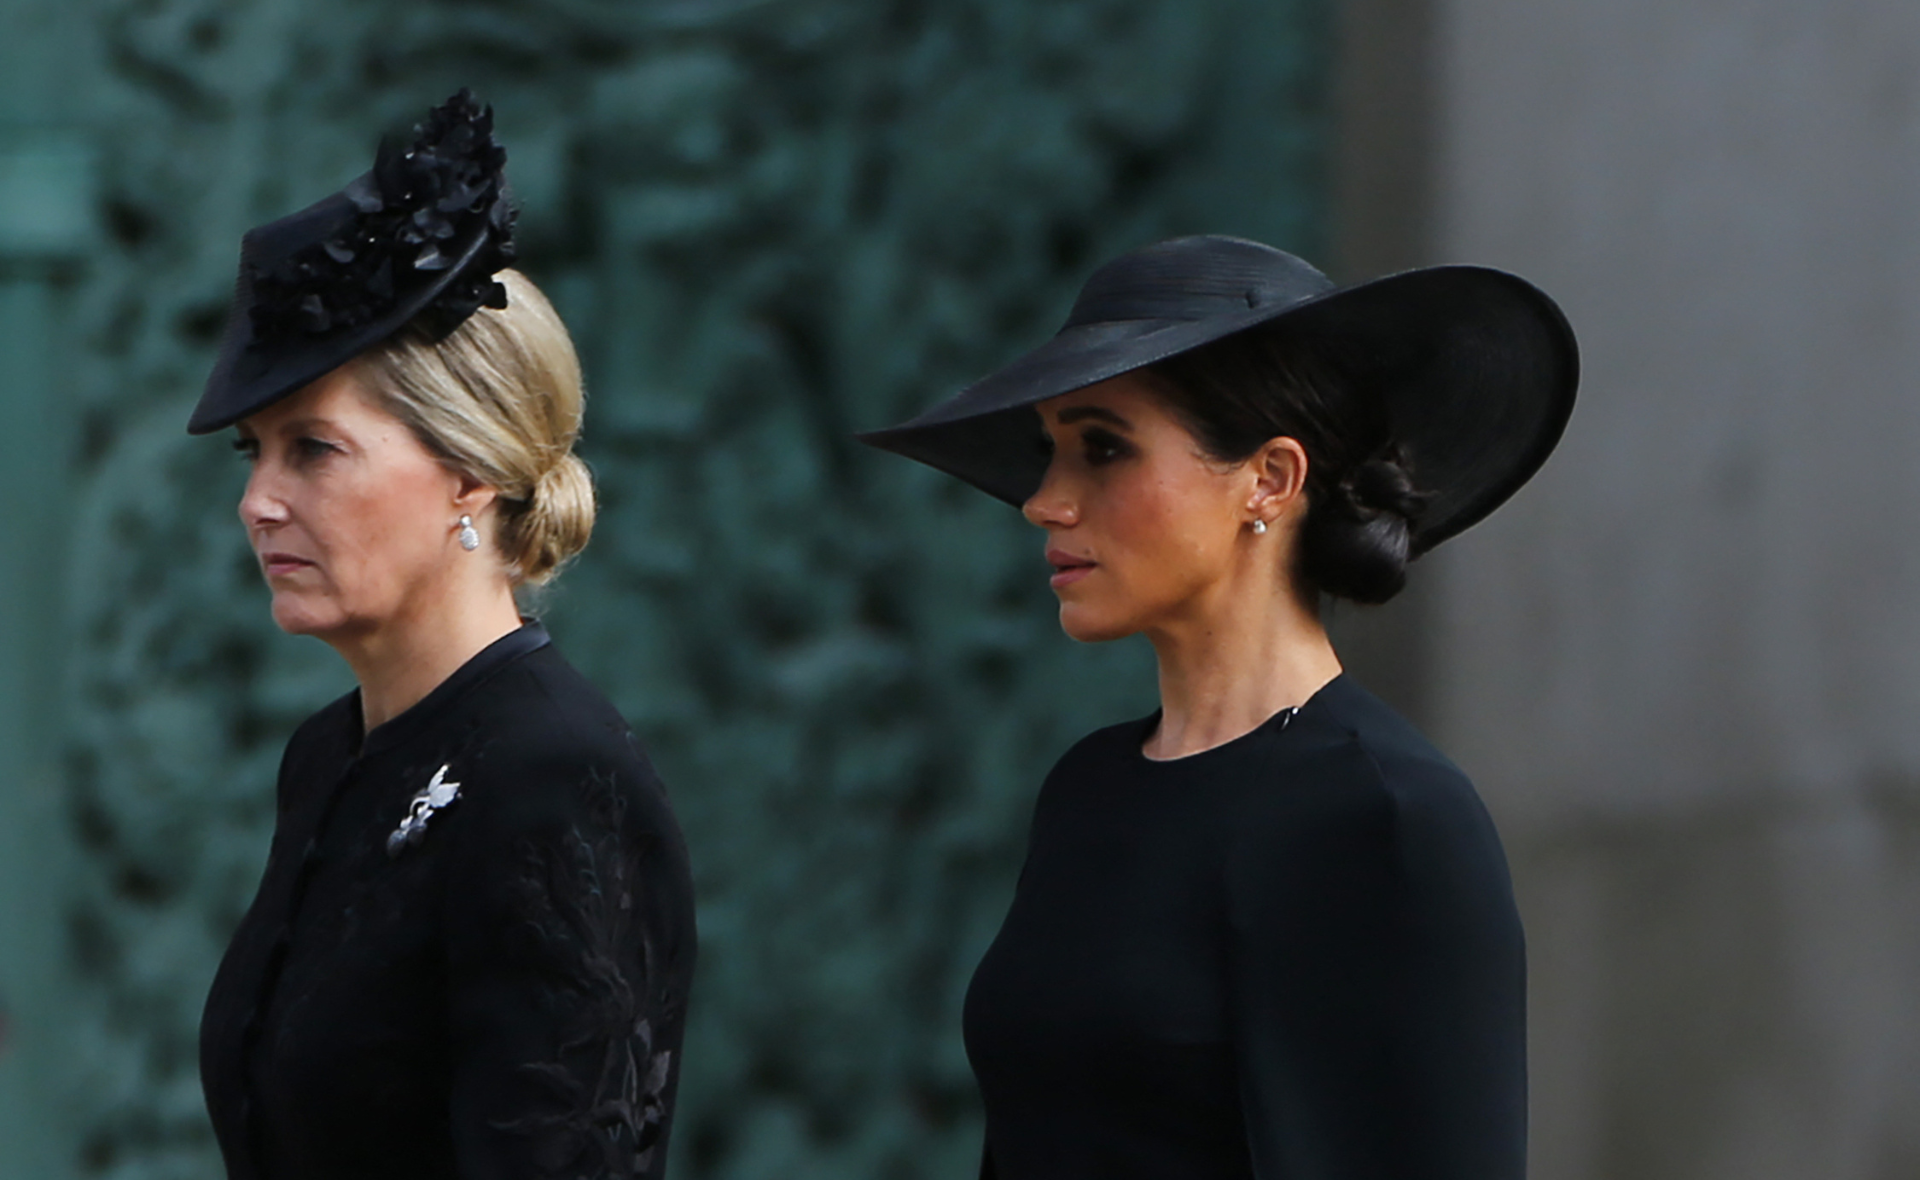 Meghan Markle rejected the Queen’s offer for guidance as she entered the royal family